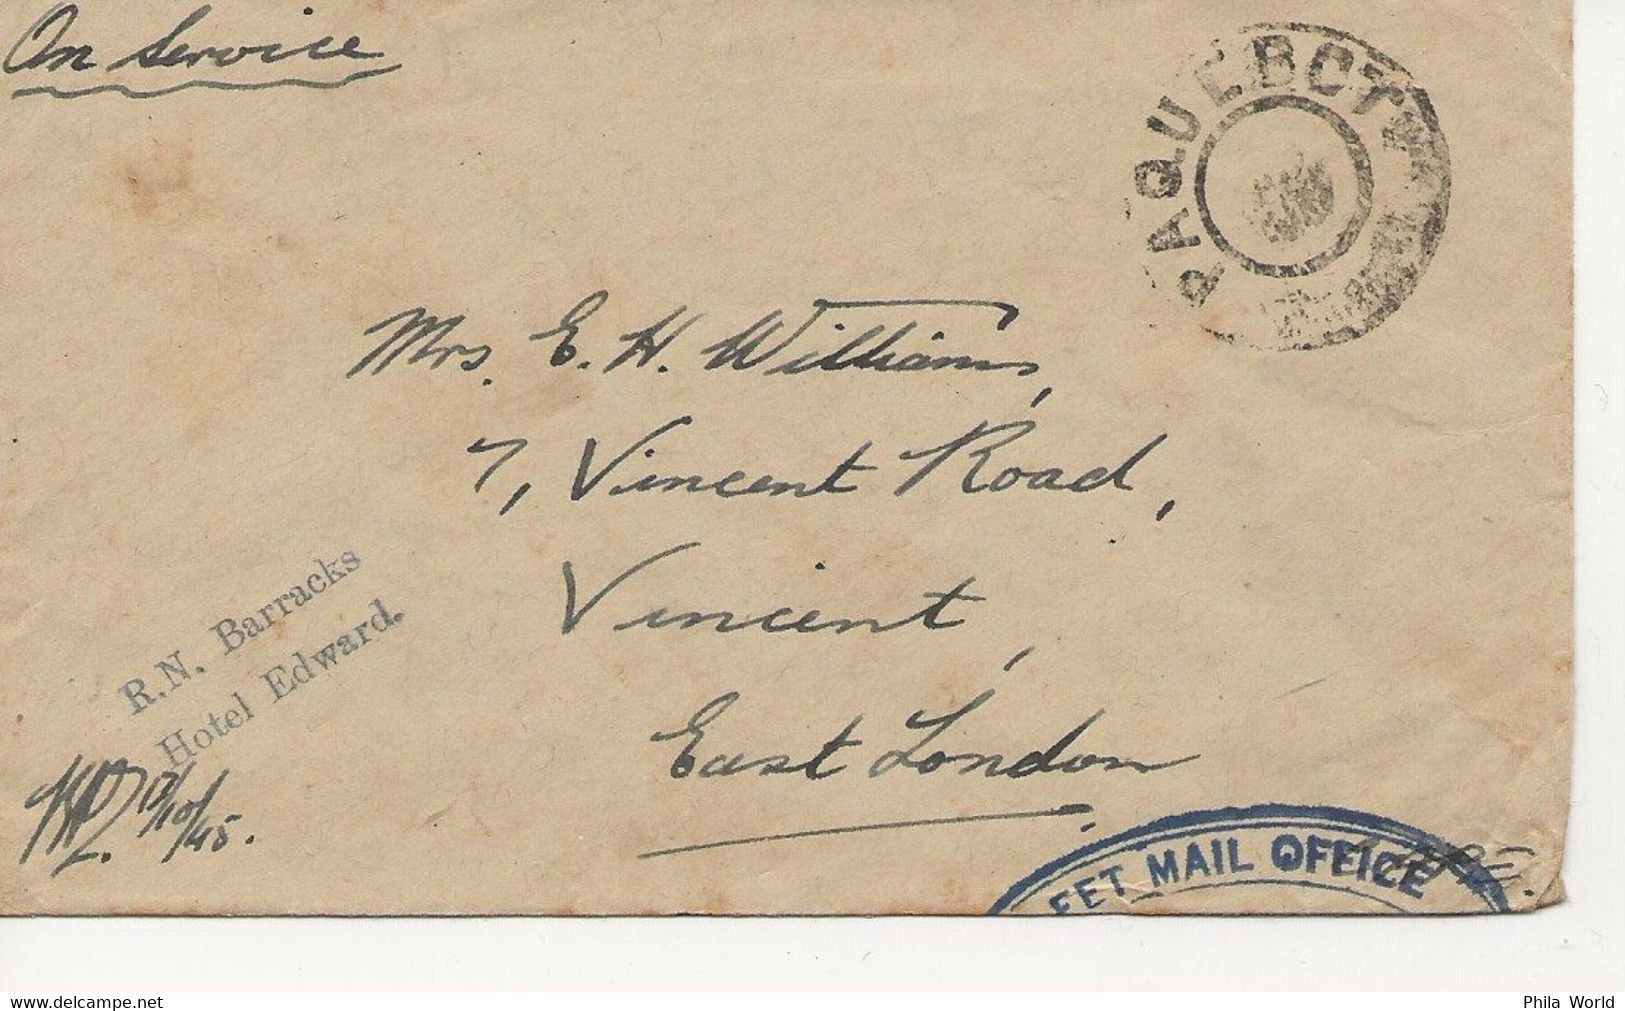 WW2 ROYAL NAVY OCT 1945 DURBAN South Africa TO EAST LONDON Great Britain PAQUEBOT STRIKE MAIL OFFICE - Schiffe